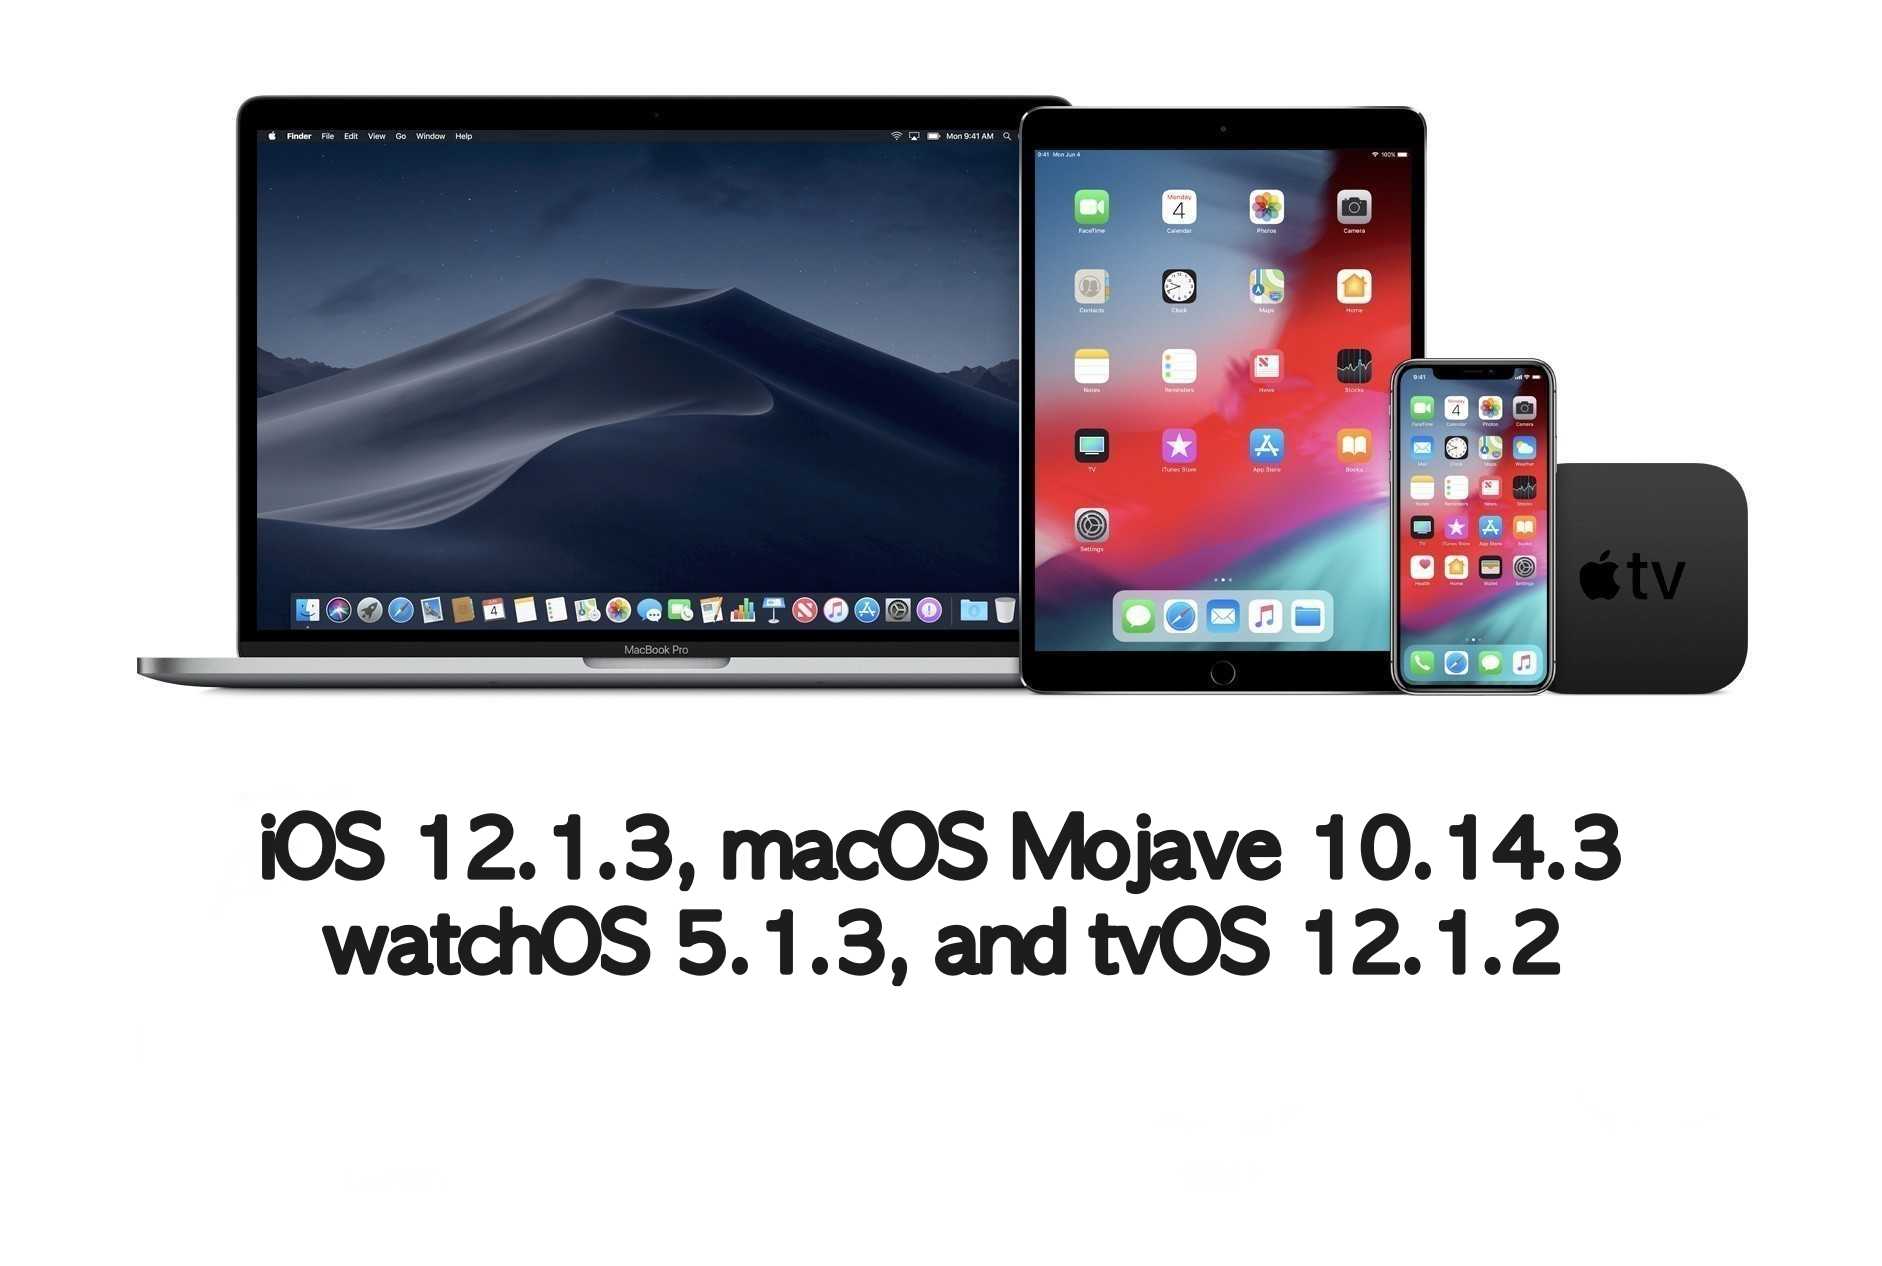 Apple releases ios 12 1 3 macos mojave 10 14 3 watchos 5 1 3 and tvos 12 1 3 524645 2